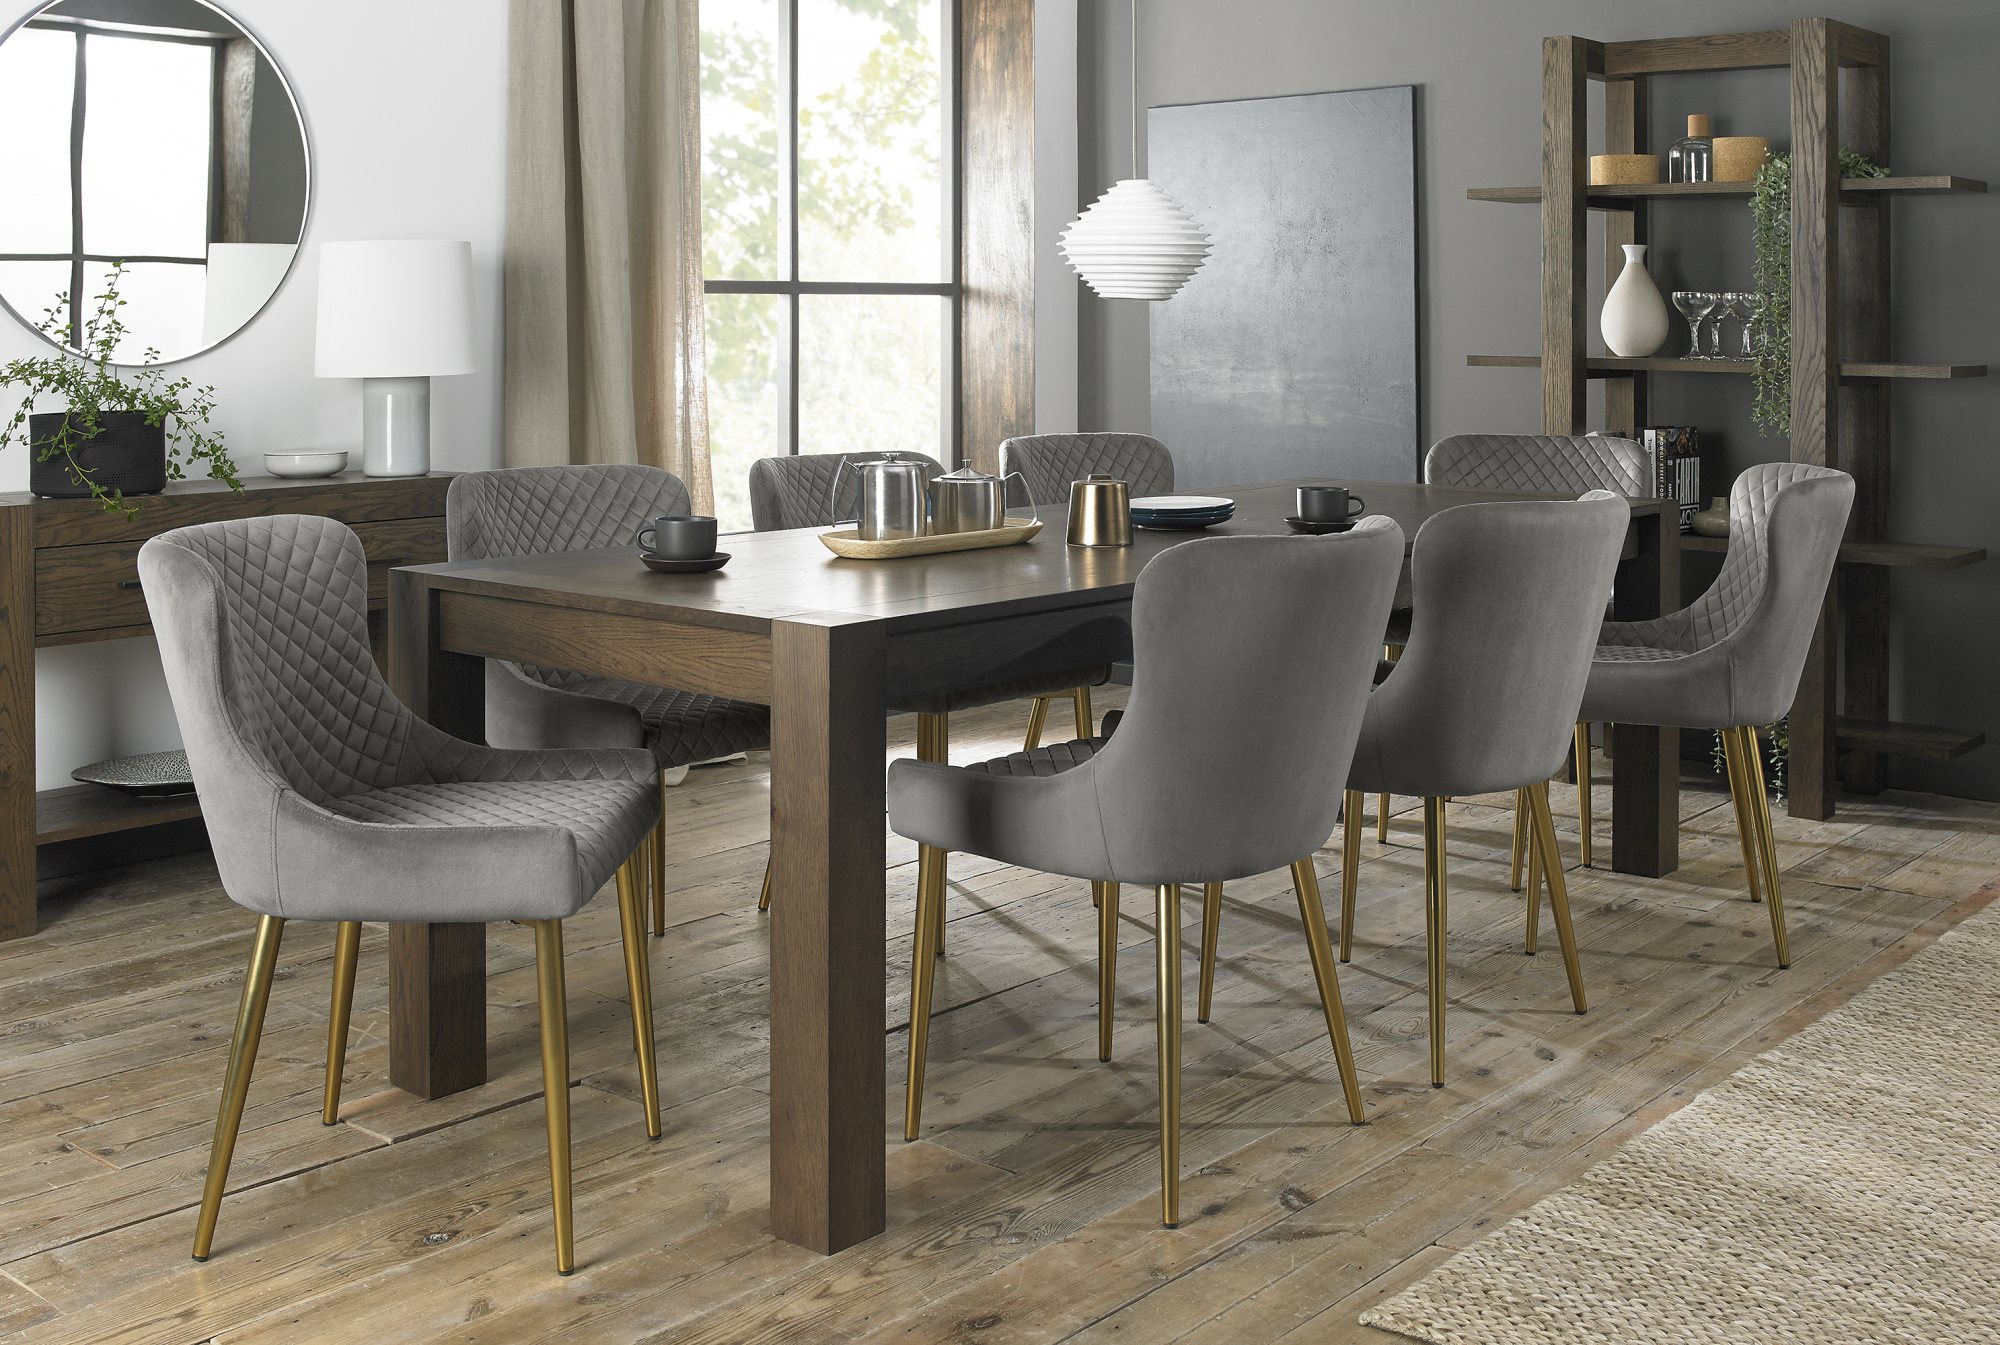 Gallery Collection Cezanne - Grey Velvet Fabric Chairs with Matt Gold